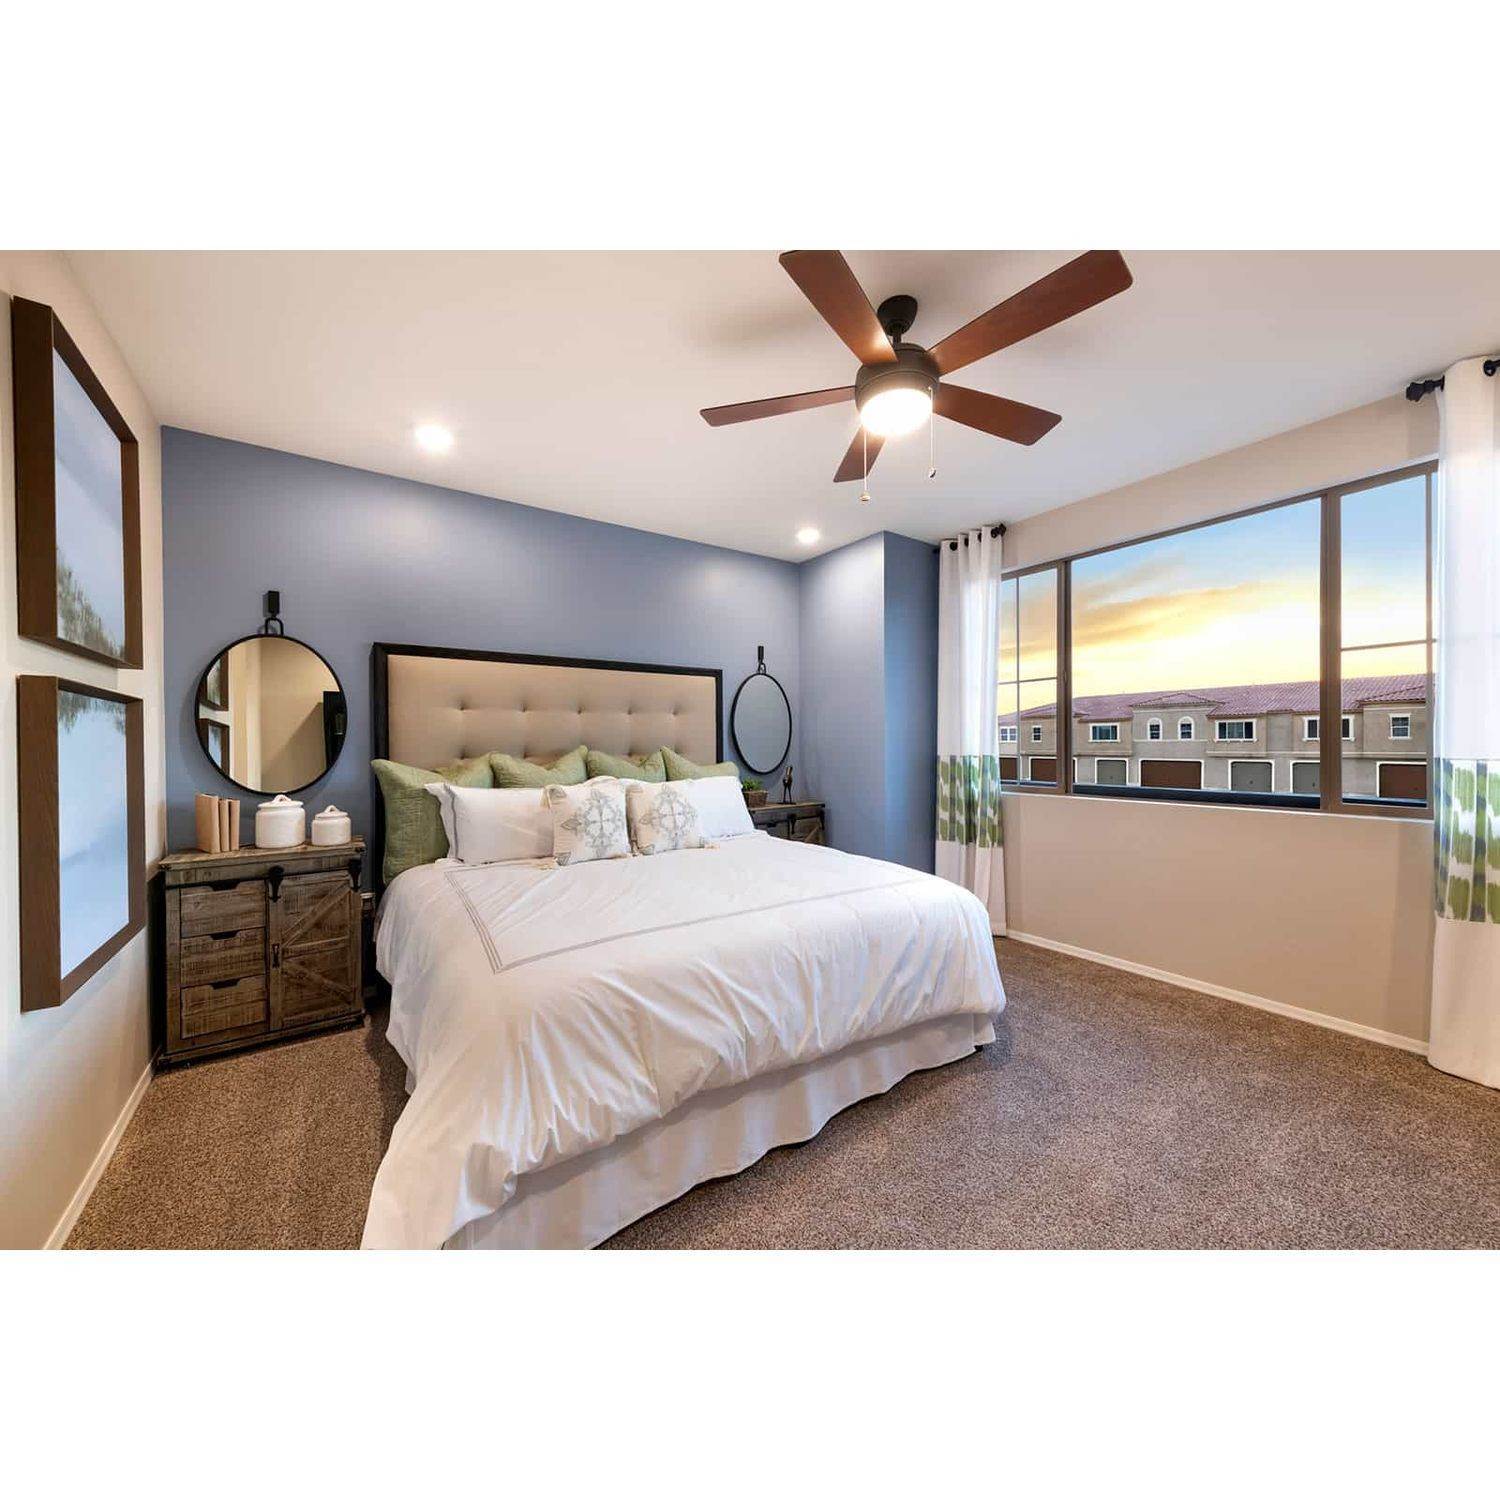 24. The Towns at Annecy建於 2660 S. Equestrian Dr. #110, Gilbert, AZ 85295